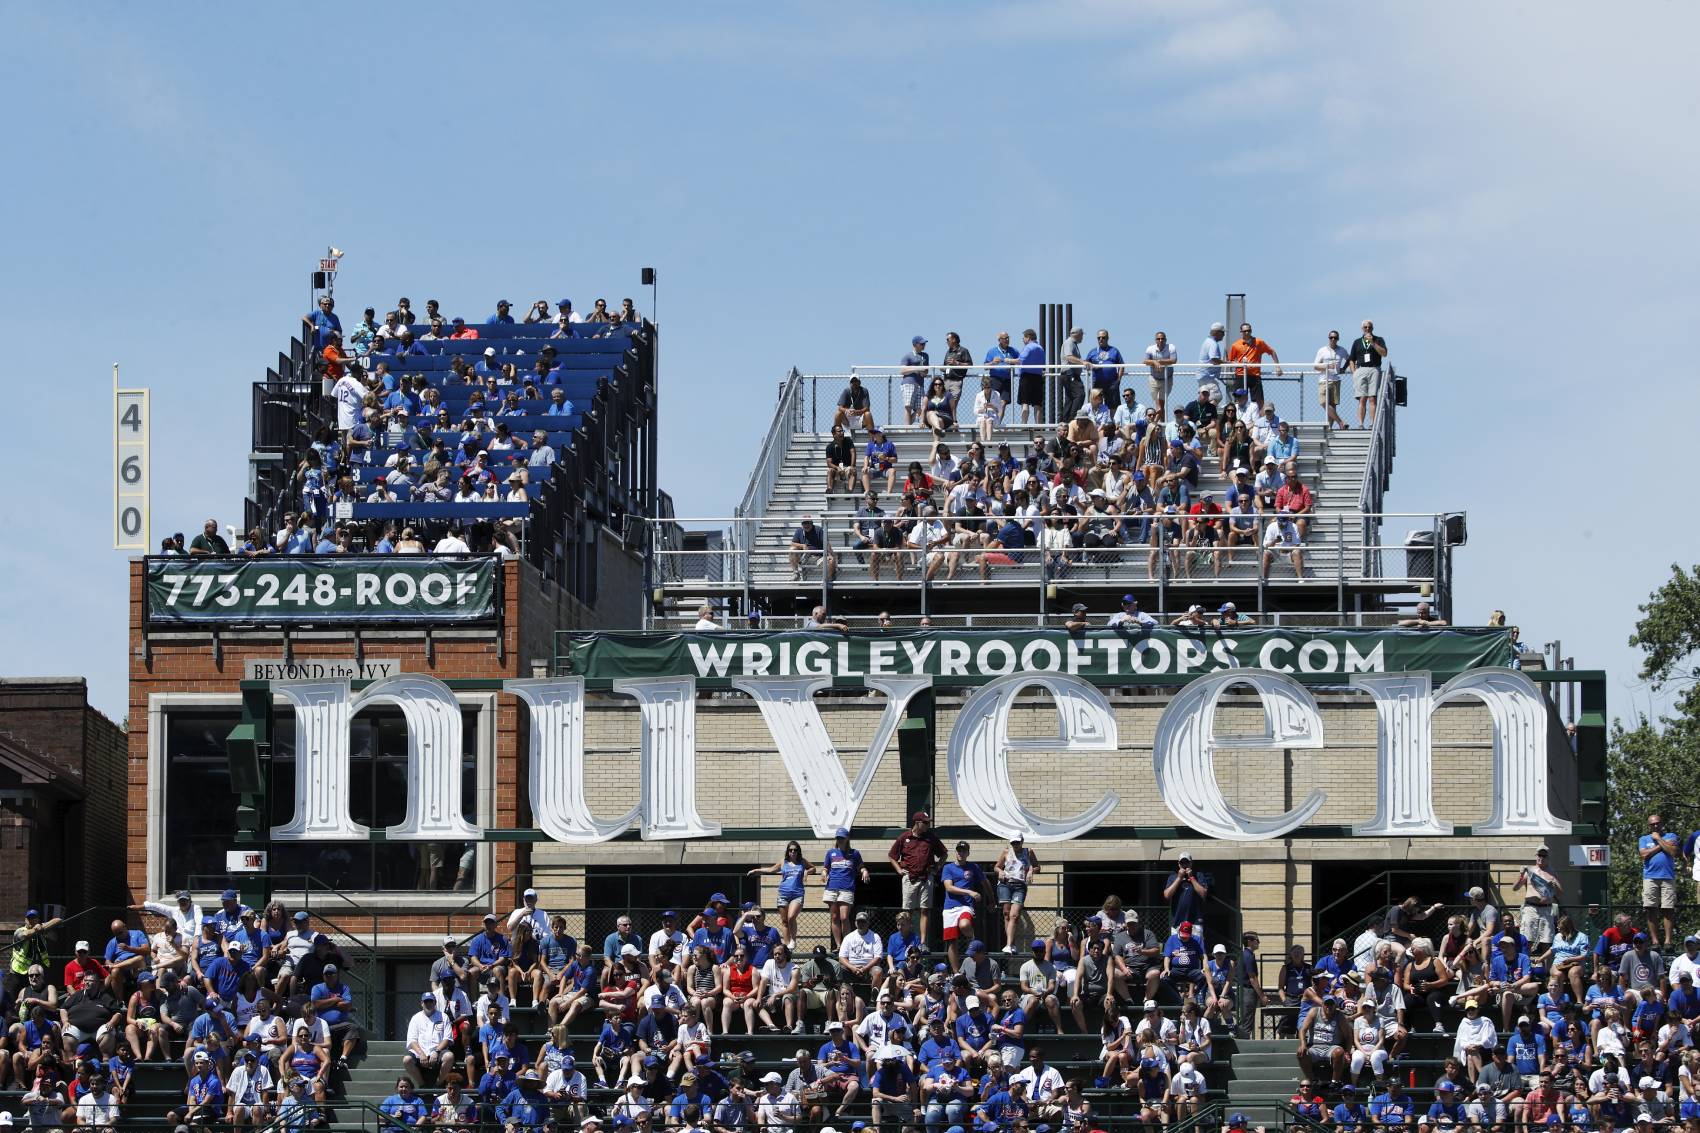 Chicago Cubs Fans Prove They’ll Pay Anything to Watch Games at Wrigley Field in Person